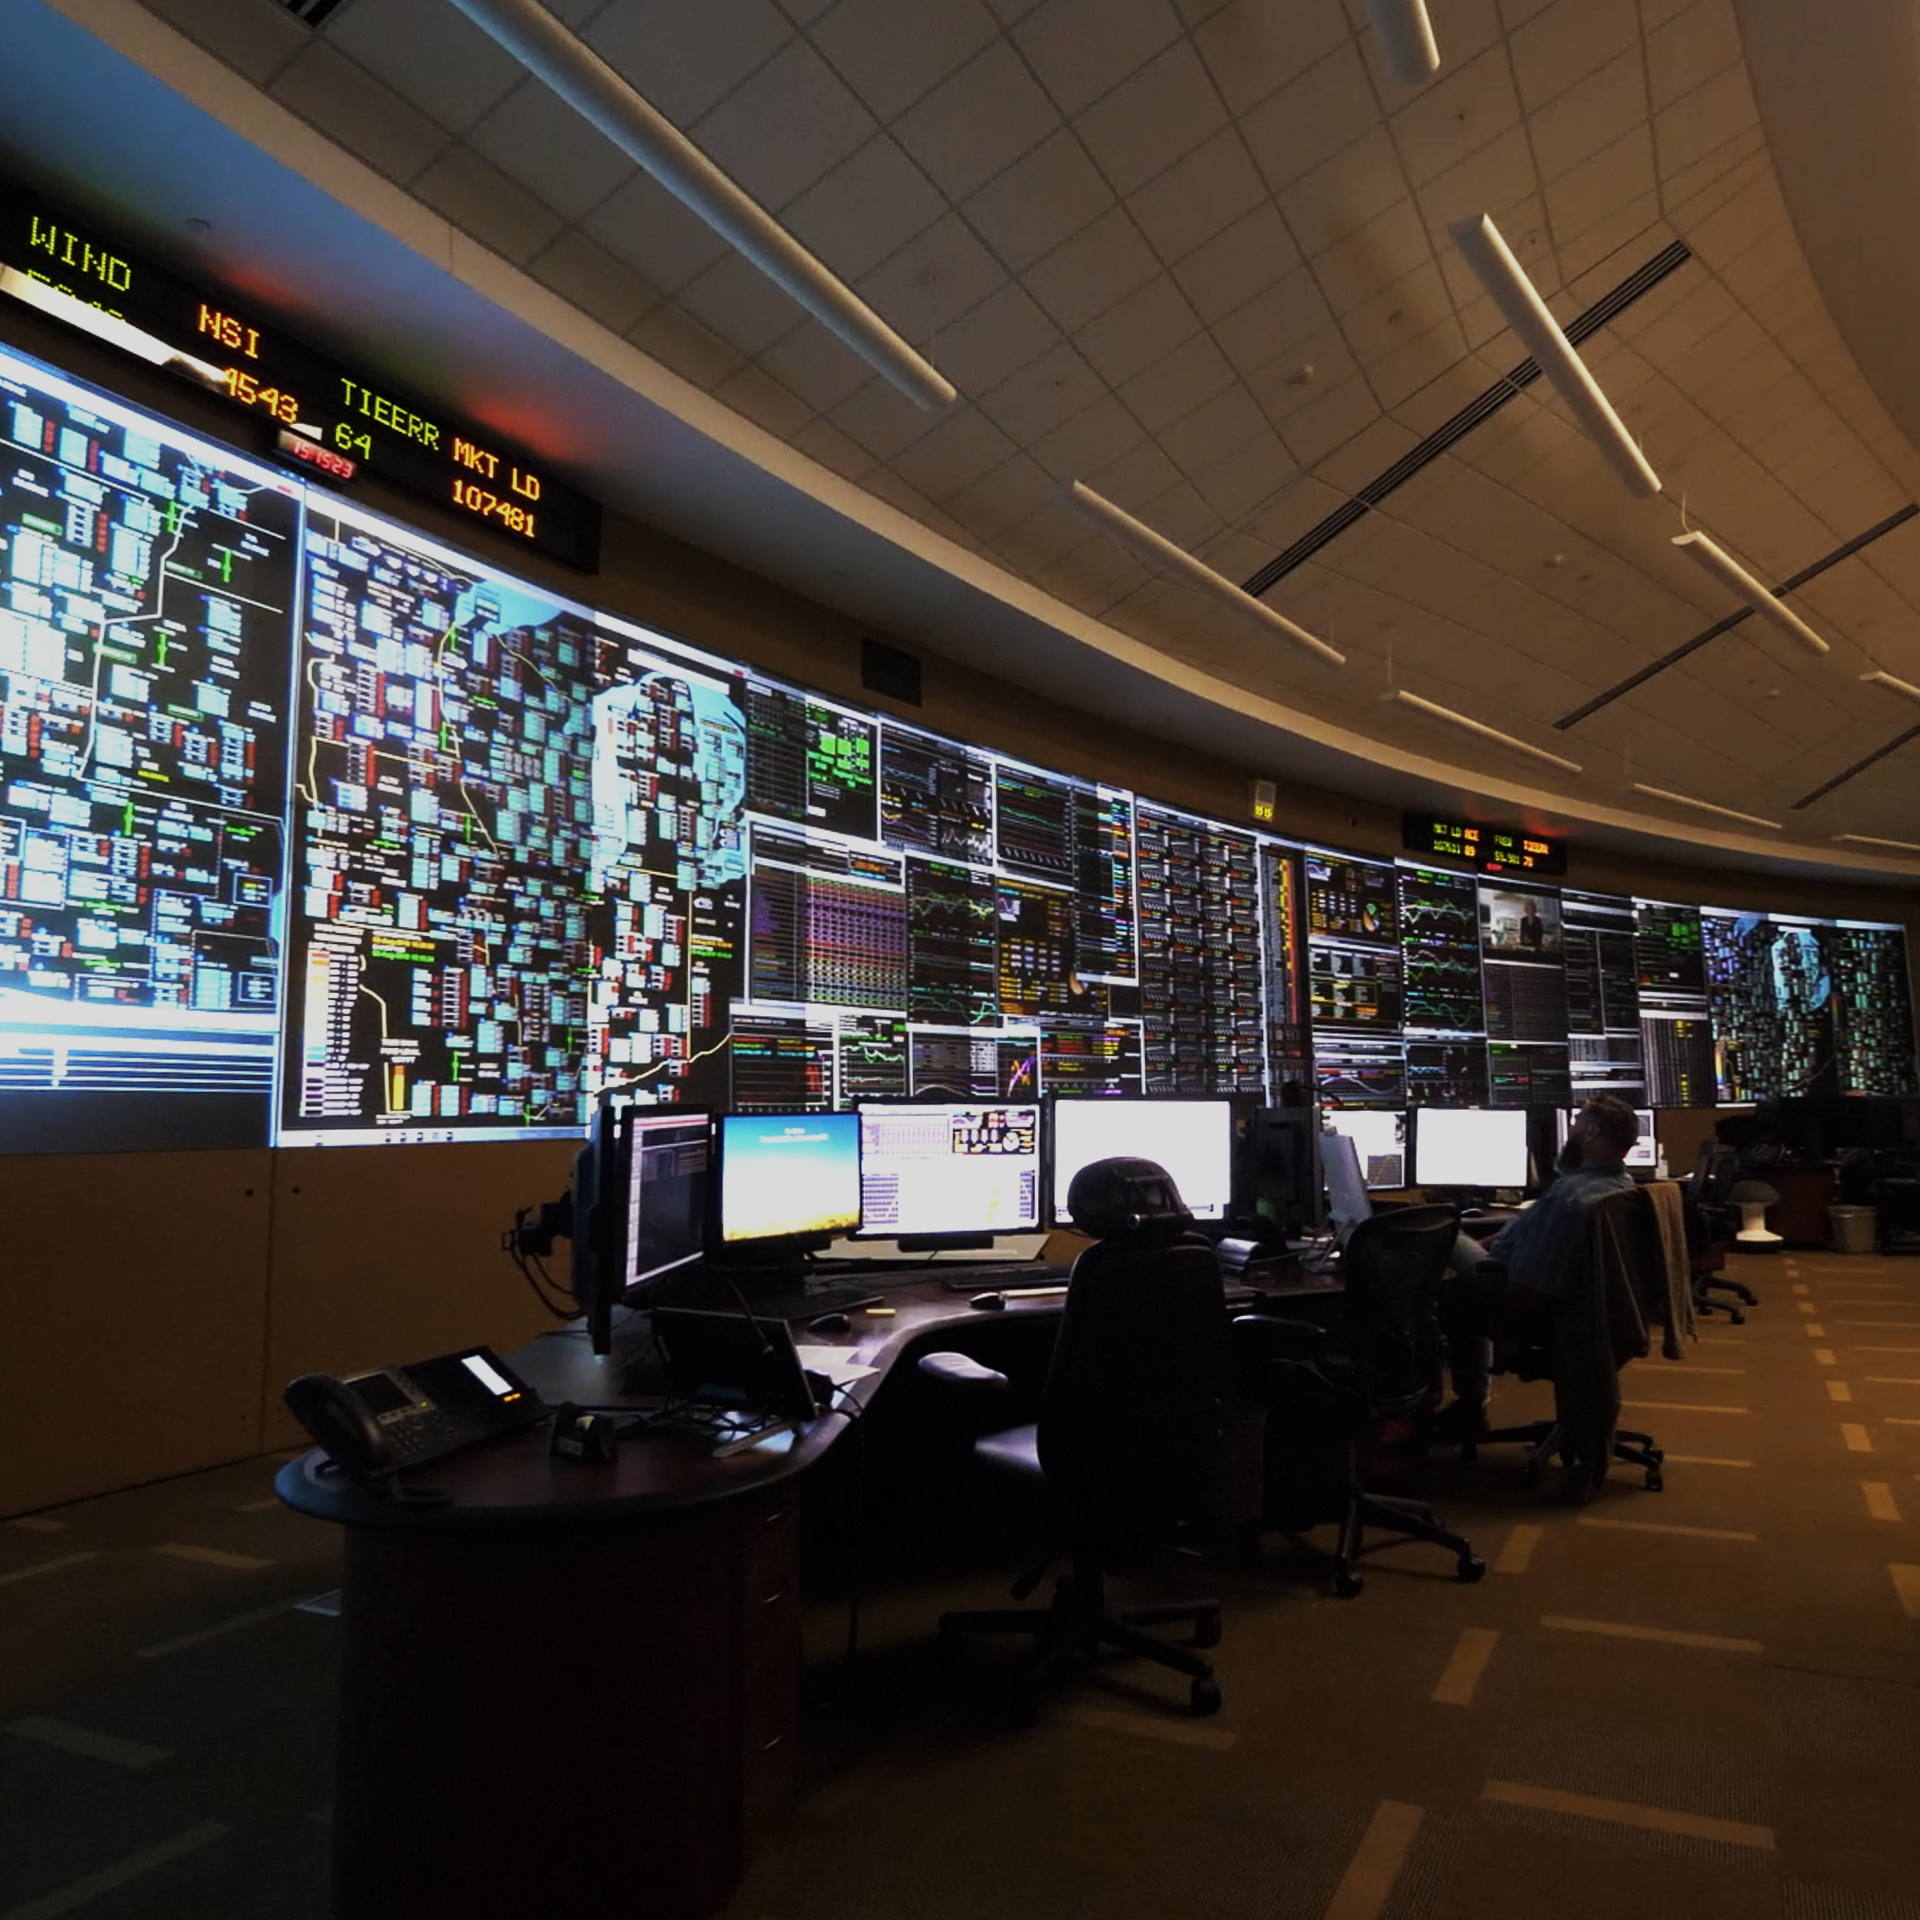 Miso electrical grid control room